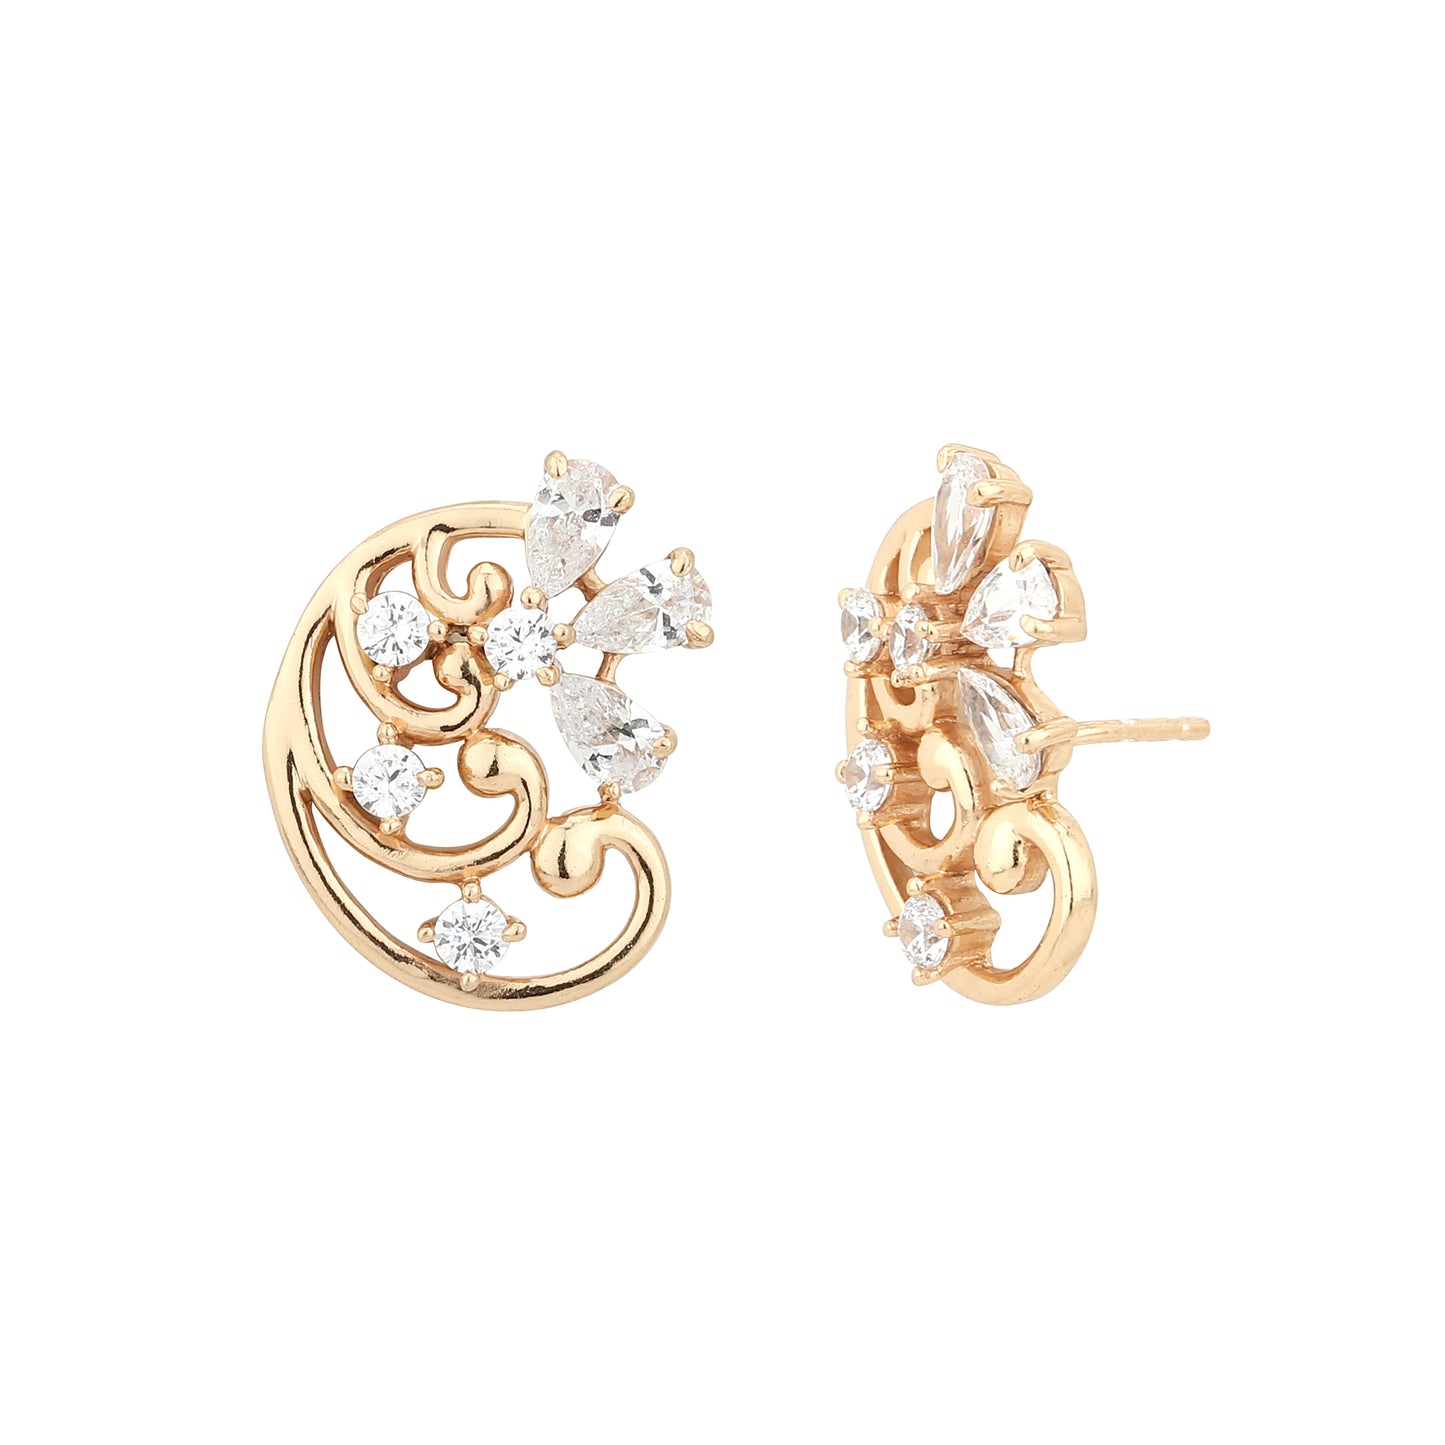 Carlton London Rose Gold Contemporary Floral Stud Earrings